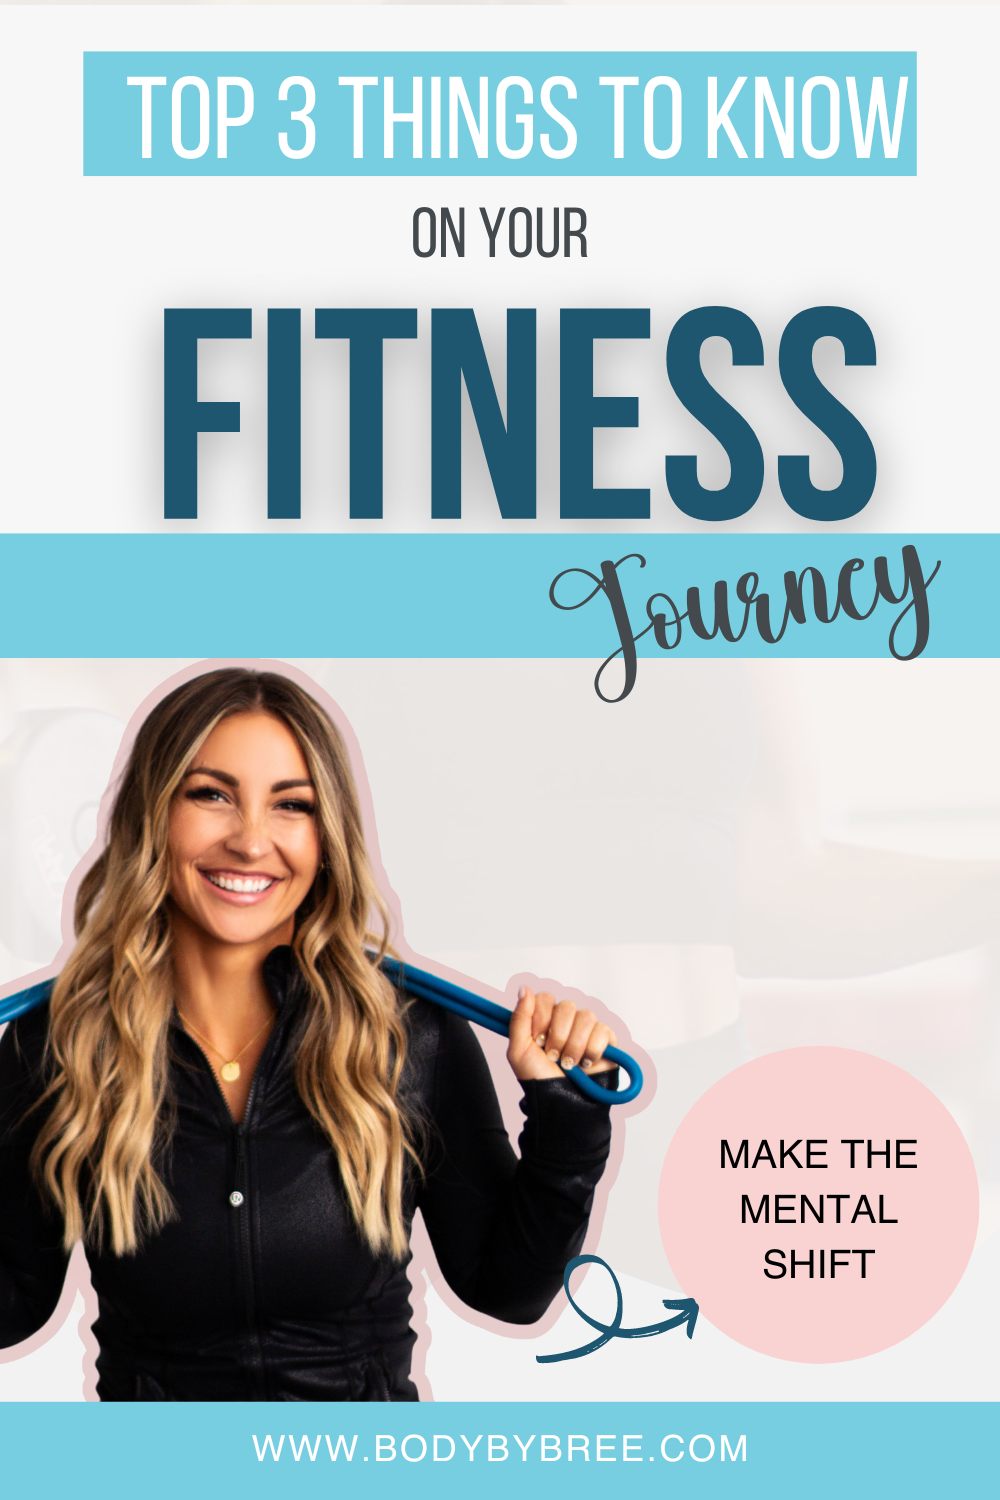 TOP 3 THINGS TO KNOW FOR YOUR FITNESS JOURNEY